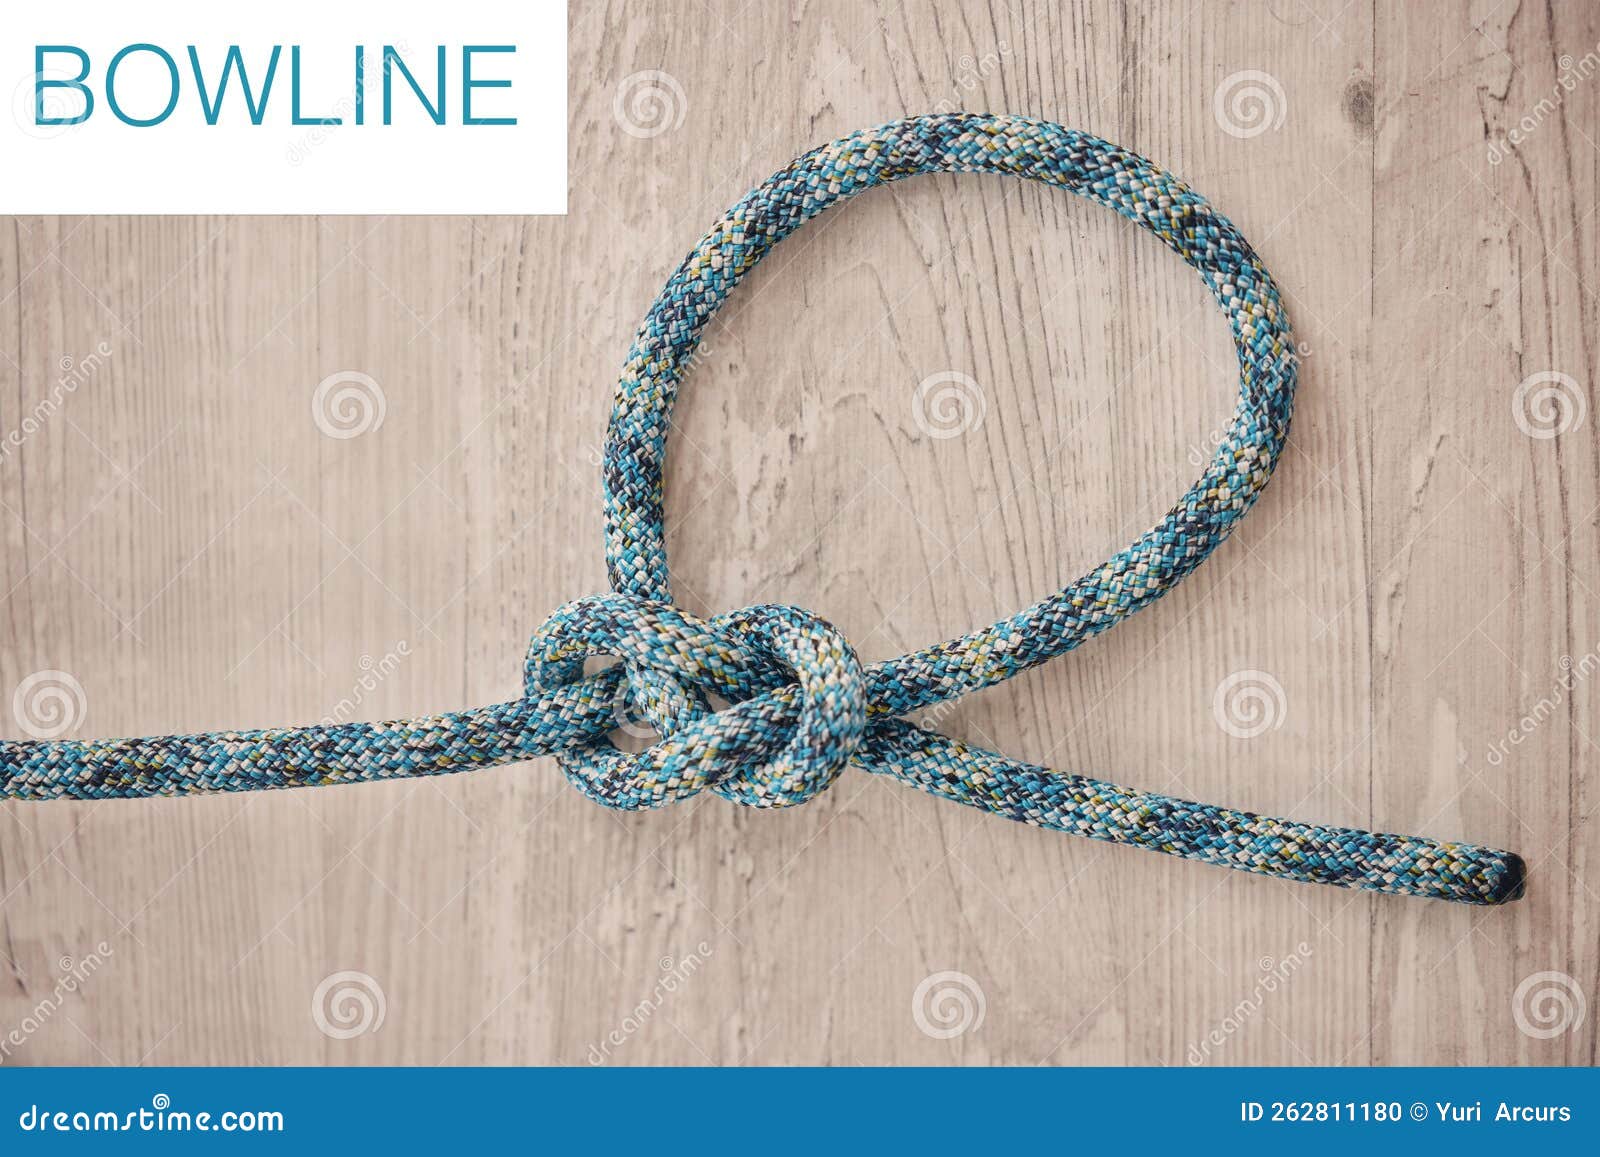 https://thumbs.dreamstime.com/z/safety-prevention-hiking-rope-knot-bowline-against-wooden-background-ready-to-be-used-adventure-rock-safety-262811180.jpg